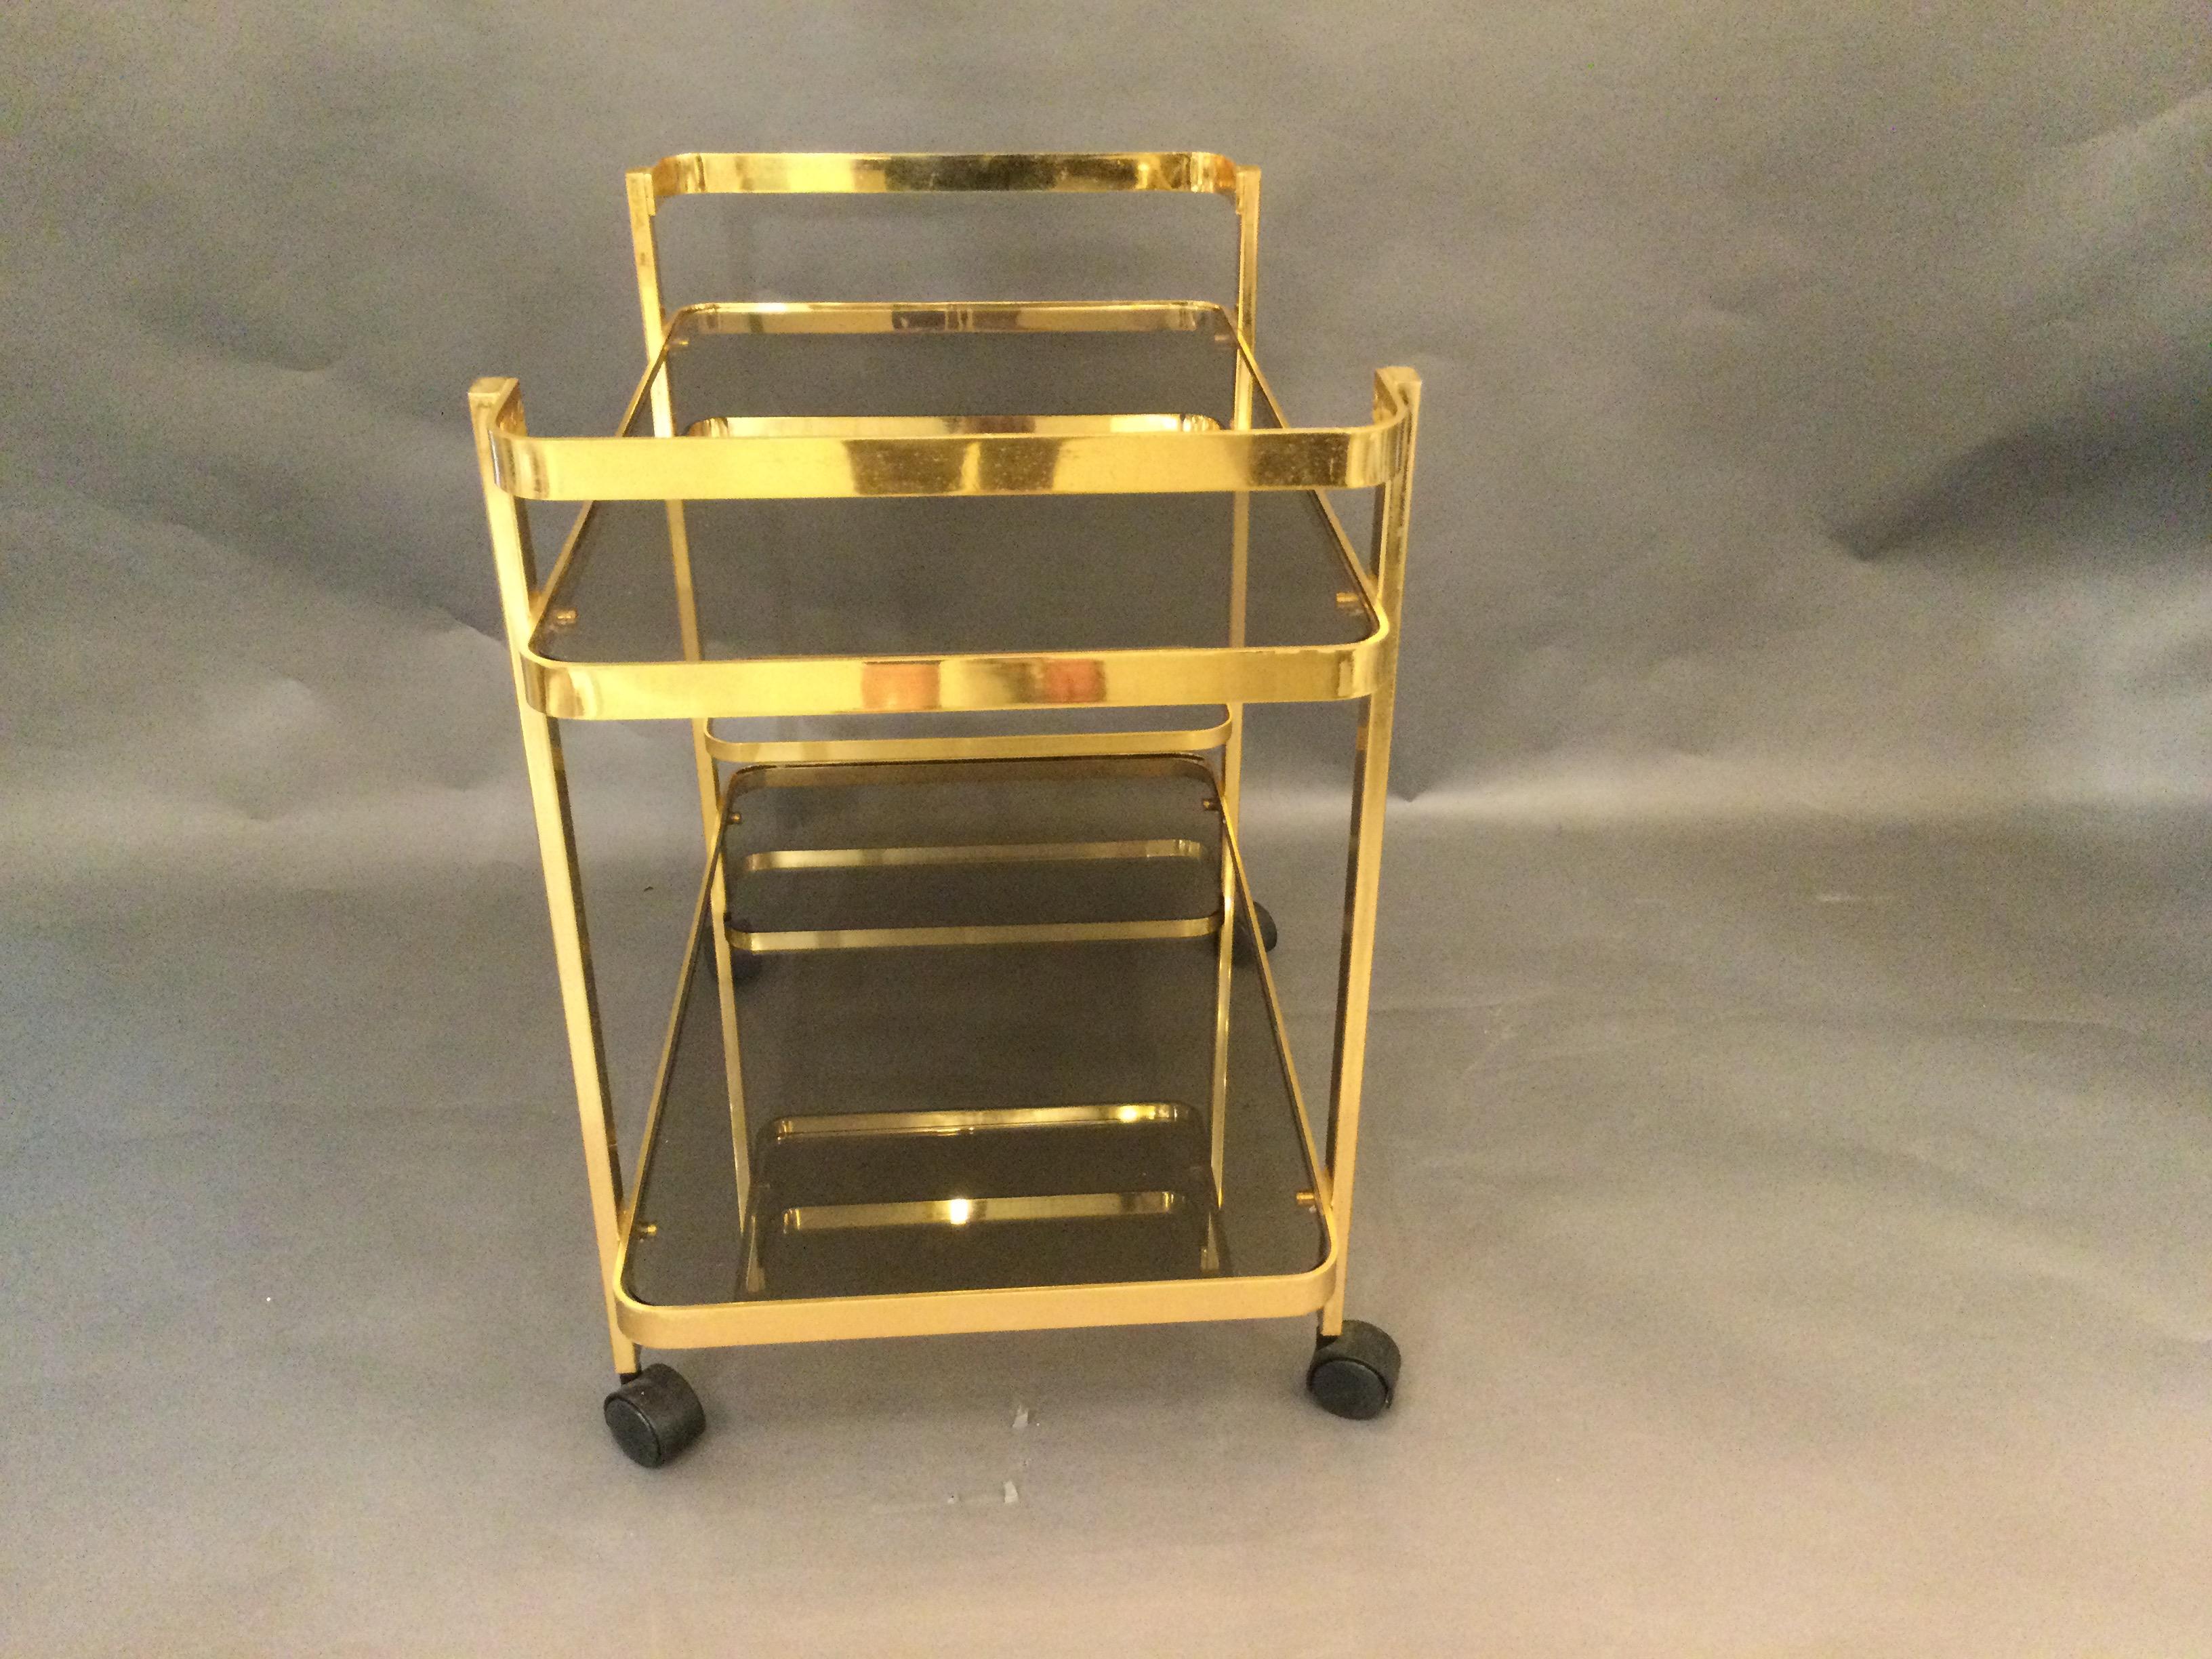 Elegant drinks trolley/bar cart in gilt metal with two smoky glass. Shelves are surrounded by simple curved gilt metal frame extending on the top shelves to create a handle at both ends. Bottle holder holds up to three bottles. Designed in the 1970s